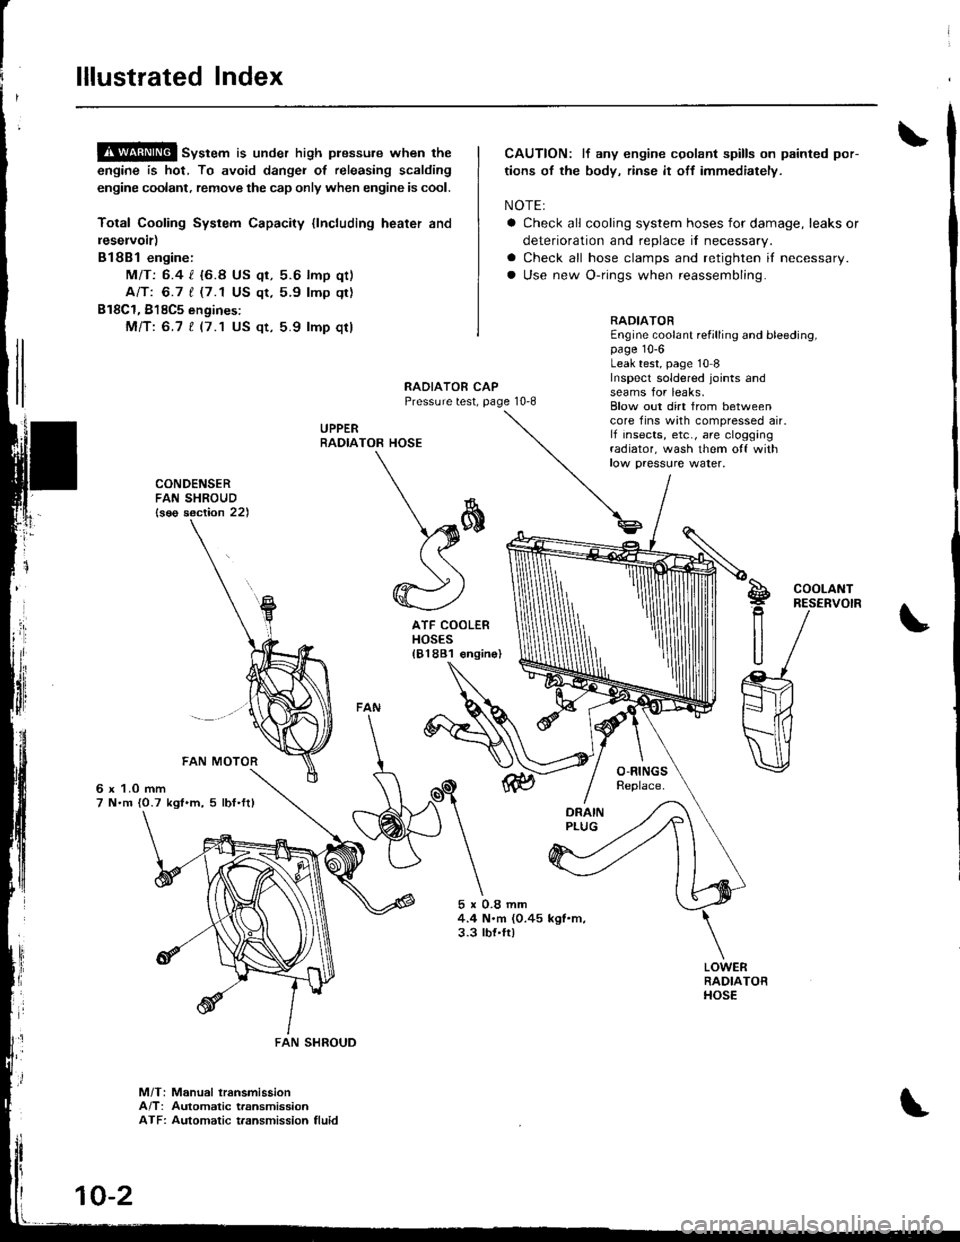 ACURA INTEGRA 1998  Service Repair Manual lllustrated Index
!$!!@ sv"t"m is under high plessure when the
engine is hot, To avoid dangei of releasing scalding
engine coolant, remove the cap only when engine is cool.
Total Cooling System Capaci